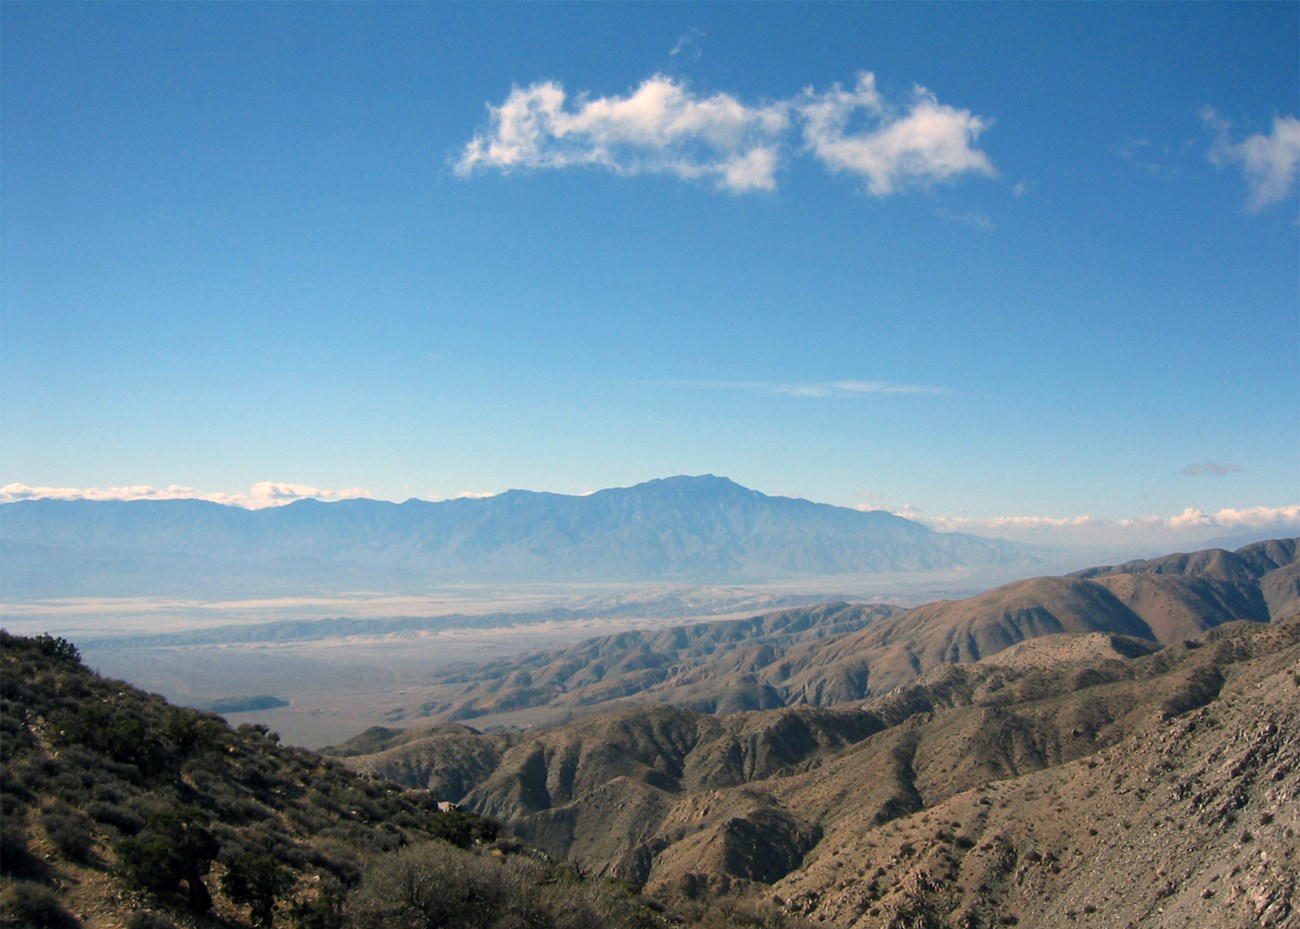 A clear view of a valley and mountains with bright blue skies